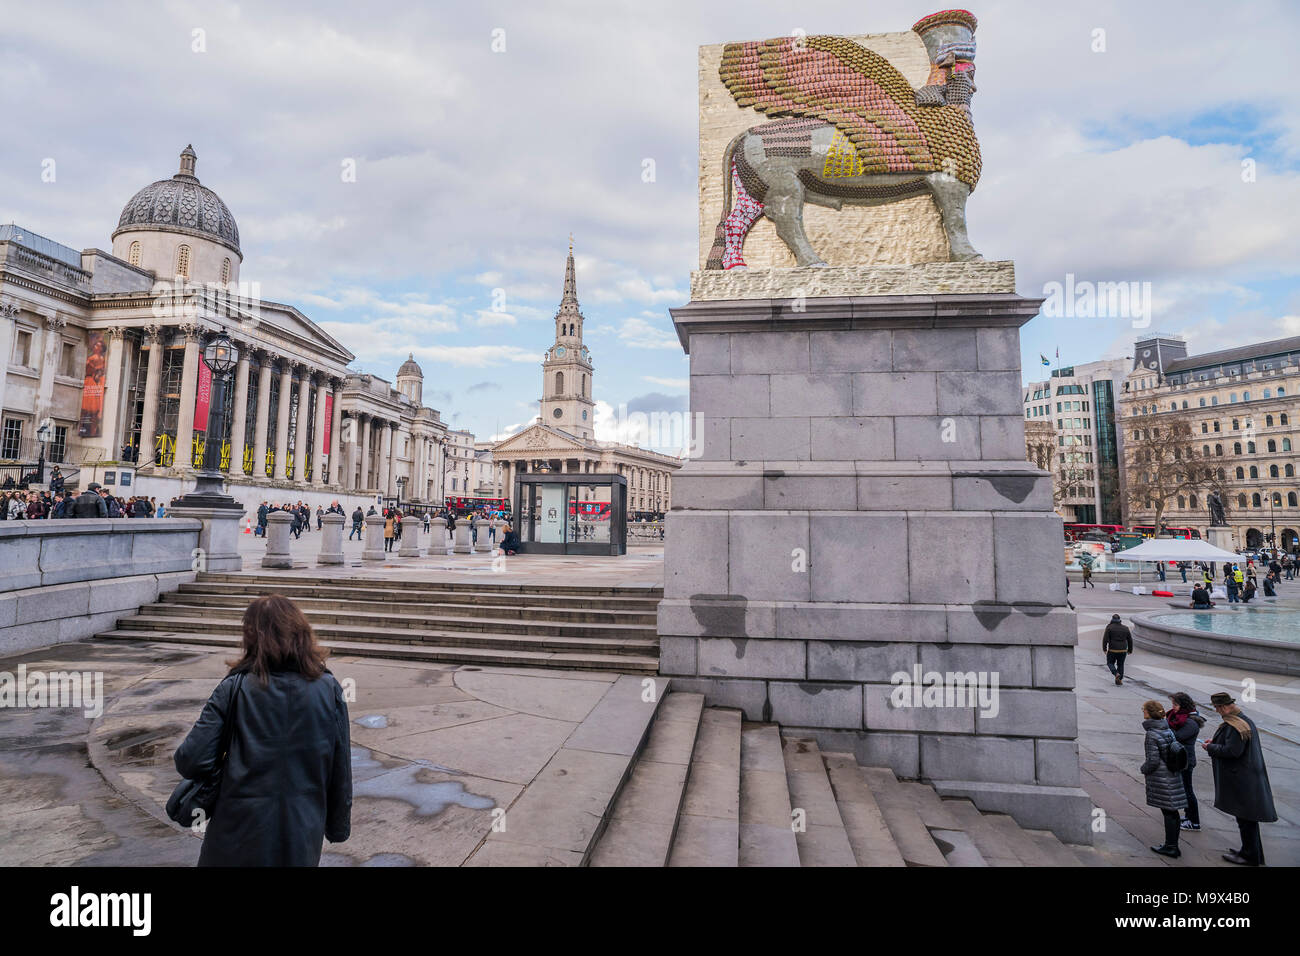 London, UK. 28th March, 2018. The Invisible Enemy Should Not Exist, the latest artwork for the fourth plinth at Trafalgar Square, by Artist Michael Rakowitz. It is designed as a tribute to “something good in the human spirit” and as a recreation of a statue destroyed by ISIS in 2015. The sculpture, which shows a mythical winged beast called a Lamassu, is 4.5 metres high, took four months to build and is made up of 10,500 empty Iraqi date syrup cans symbolising one of the country’s former thriving industries shattered by war. Credit: Guy Bell/Alamy Live News Stock Photo